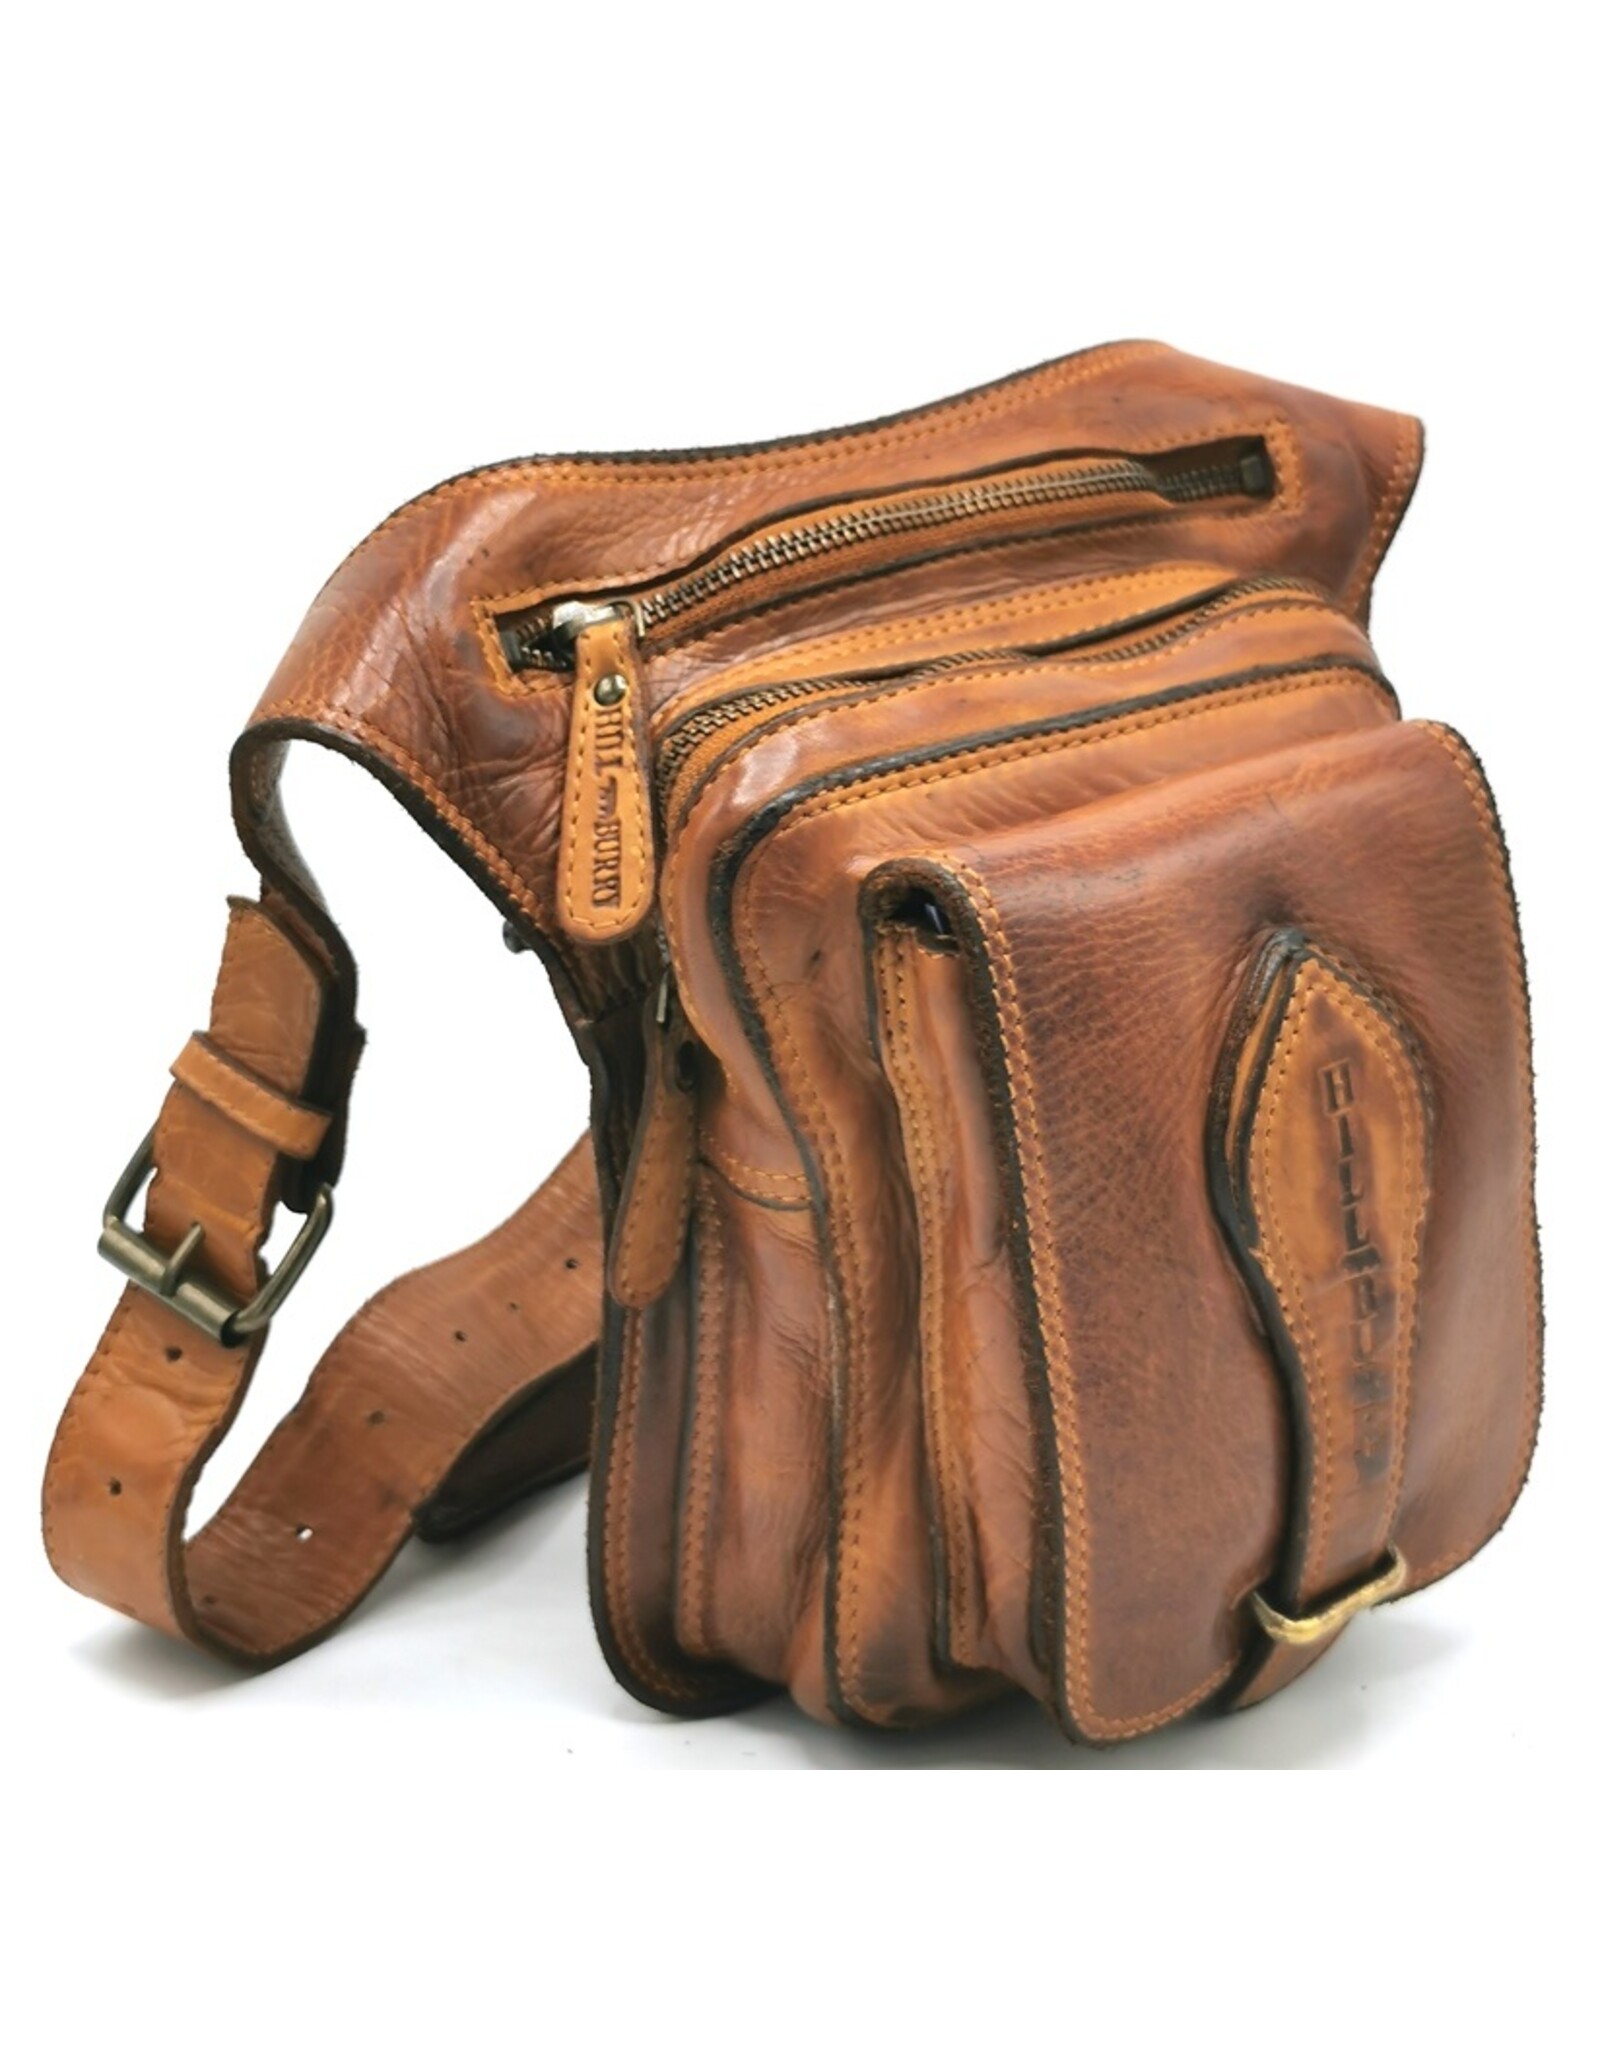 HillBurry Leather Shoulder bags  leather crossbody bags - HillBurry Leather Crossbody bag Washed Leather